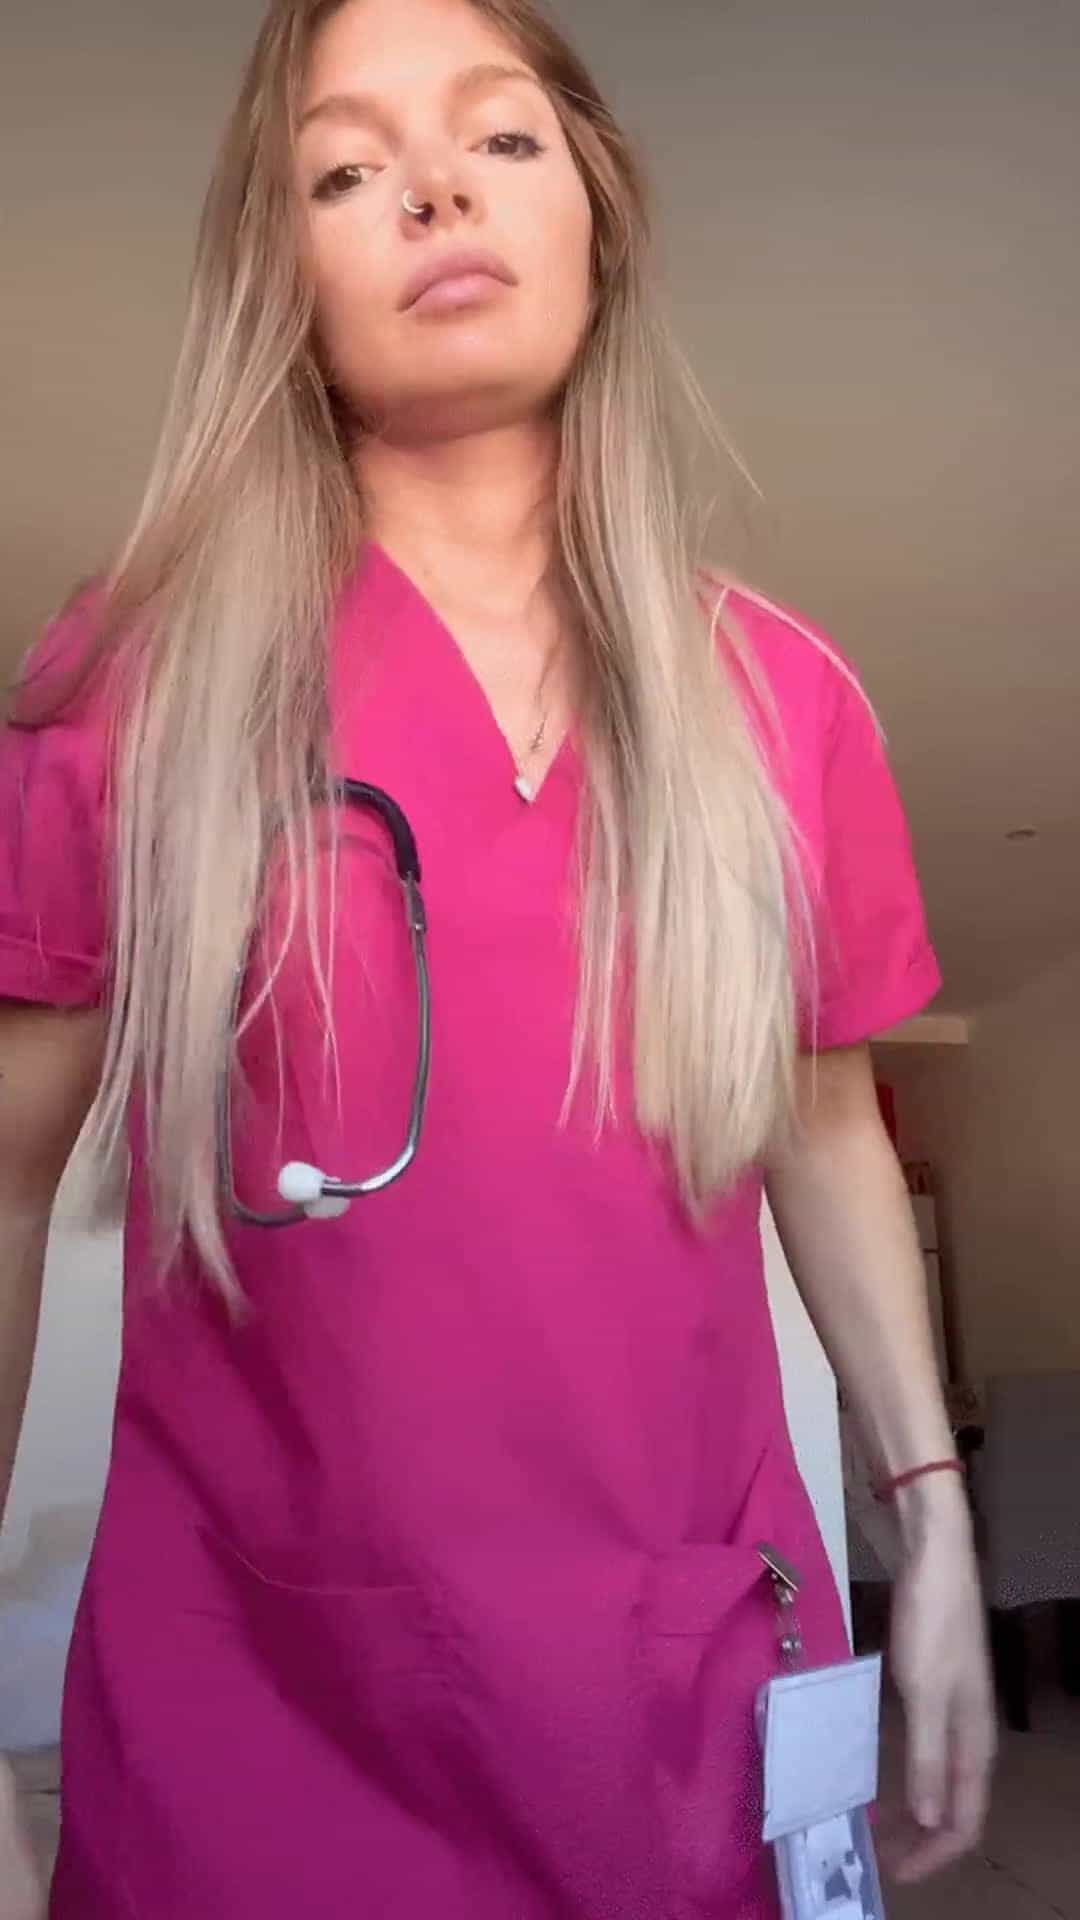 Some latina nurses have it bigger.. is it the right size for you?				